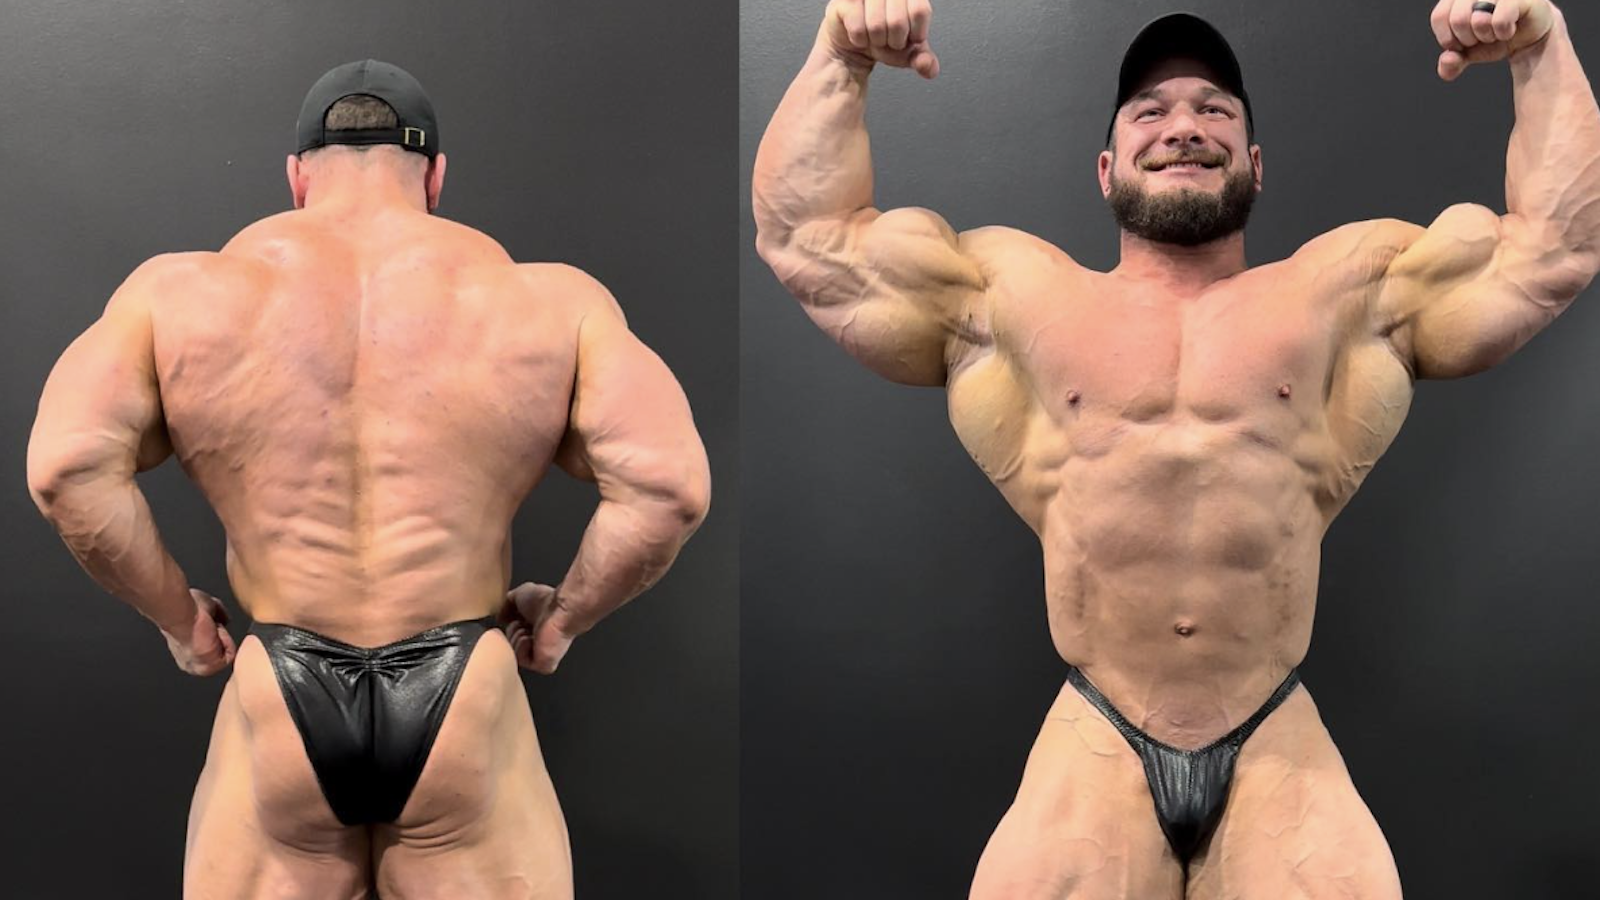 Chris Cormier, Olympia Judge Assess Hadi Choopan's & Derek Lunsford's Back  Poses Weeks from 2023 Olympia – Fitness Volt